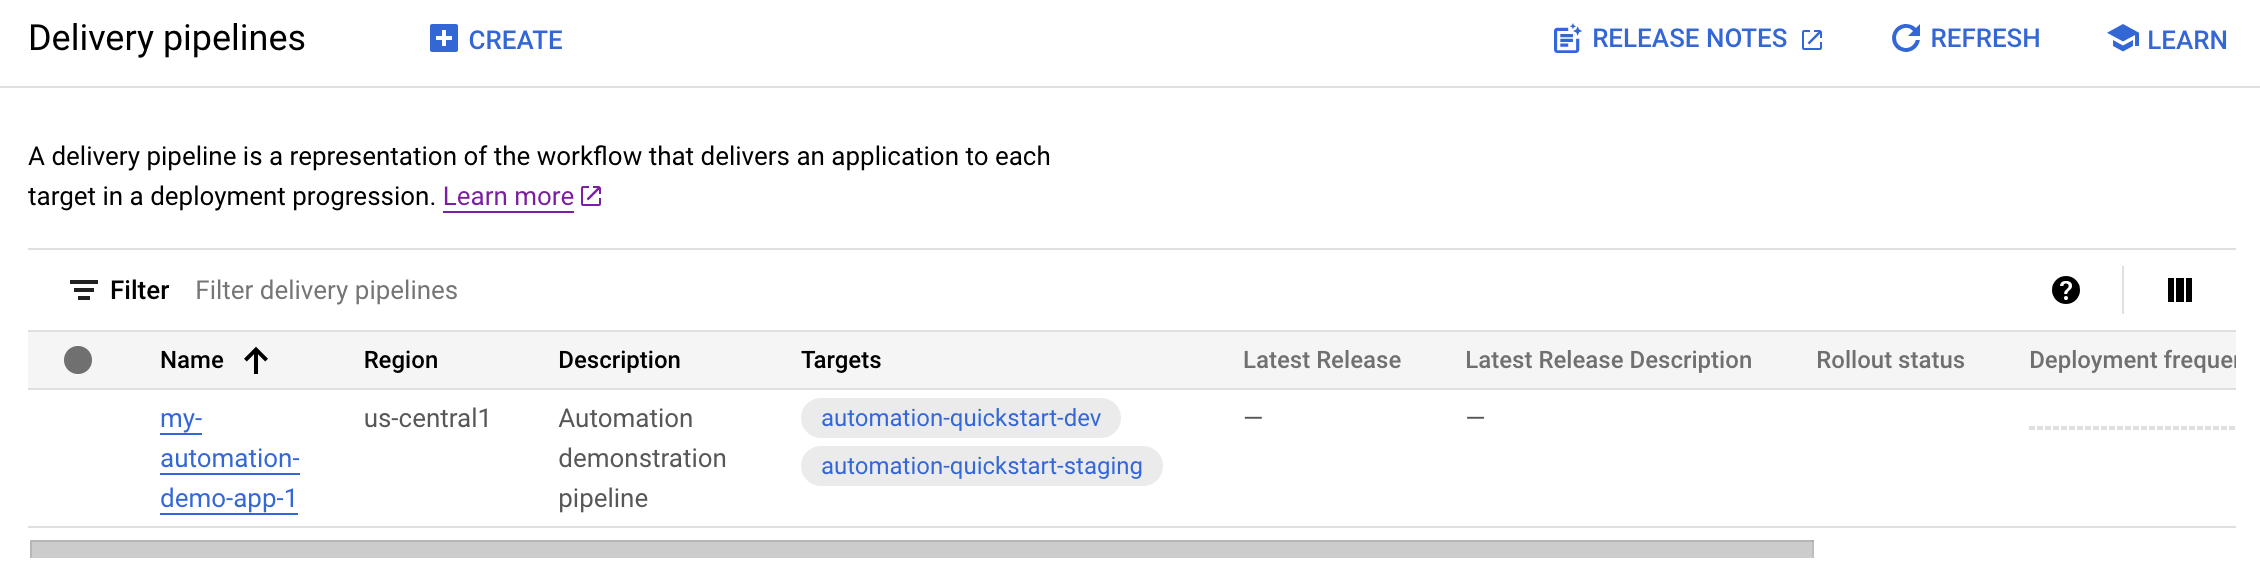 delivery pipeline visualization in Google Cloud console 